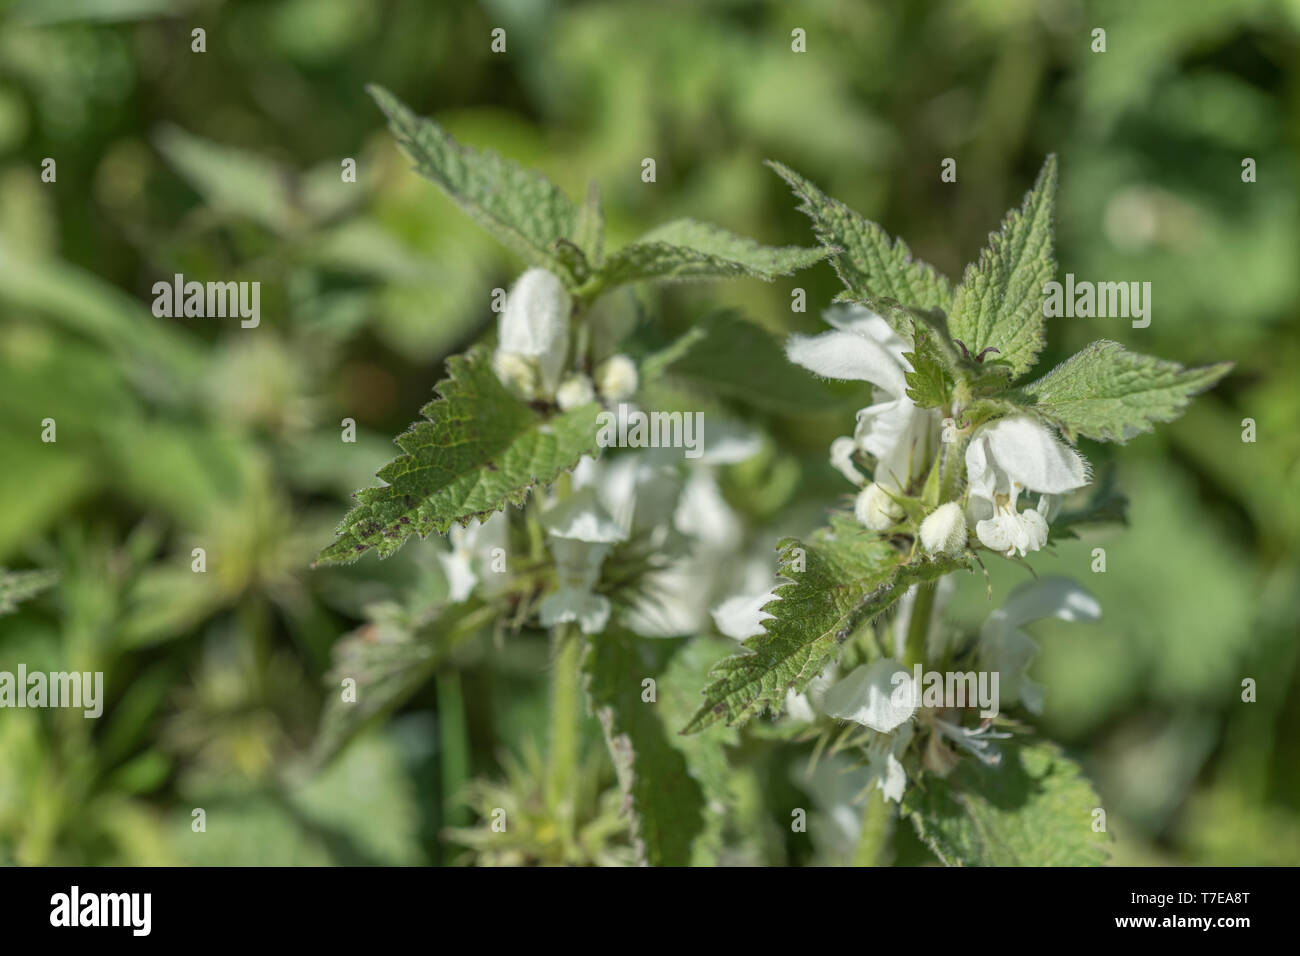 Close-up white flowers of White Dead-nettle / Lamium album - the dried flowers of which were once made into tea, while the young leaves are edible. Stock Photo